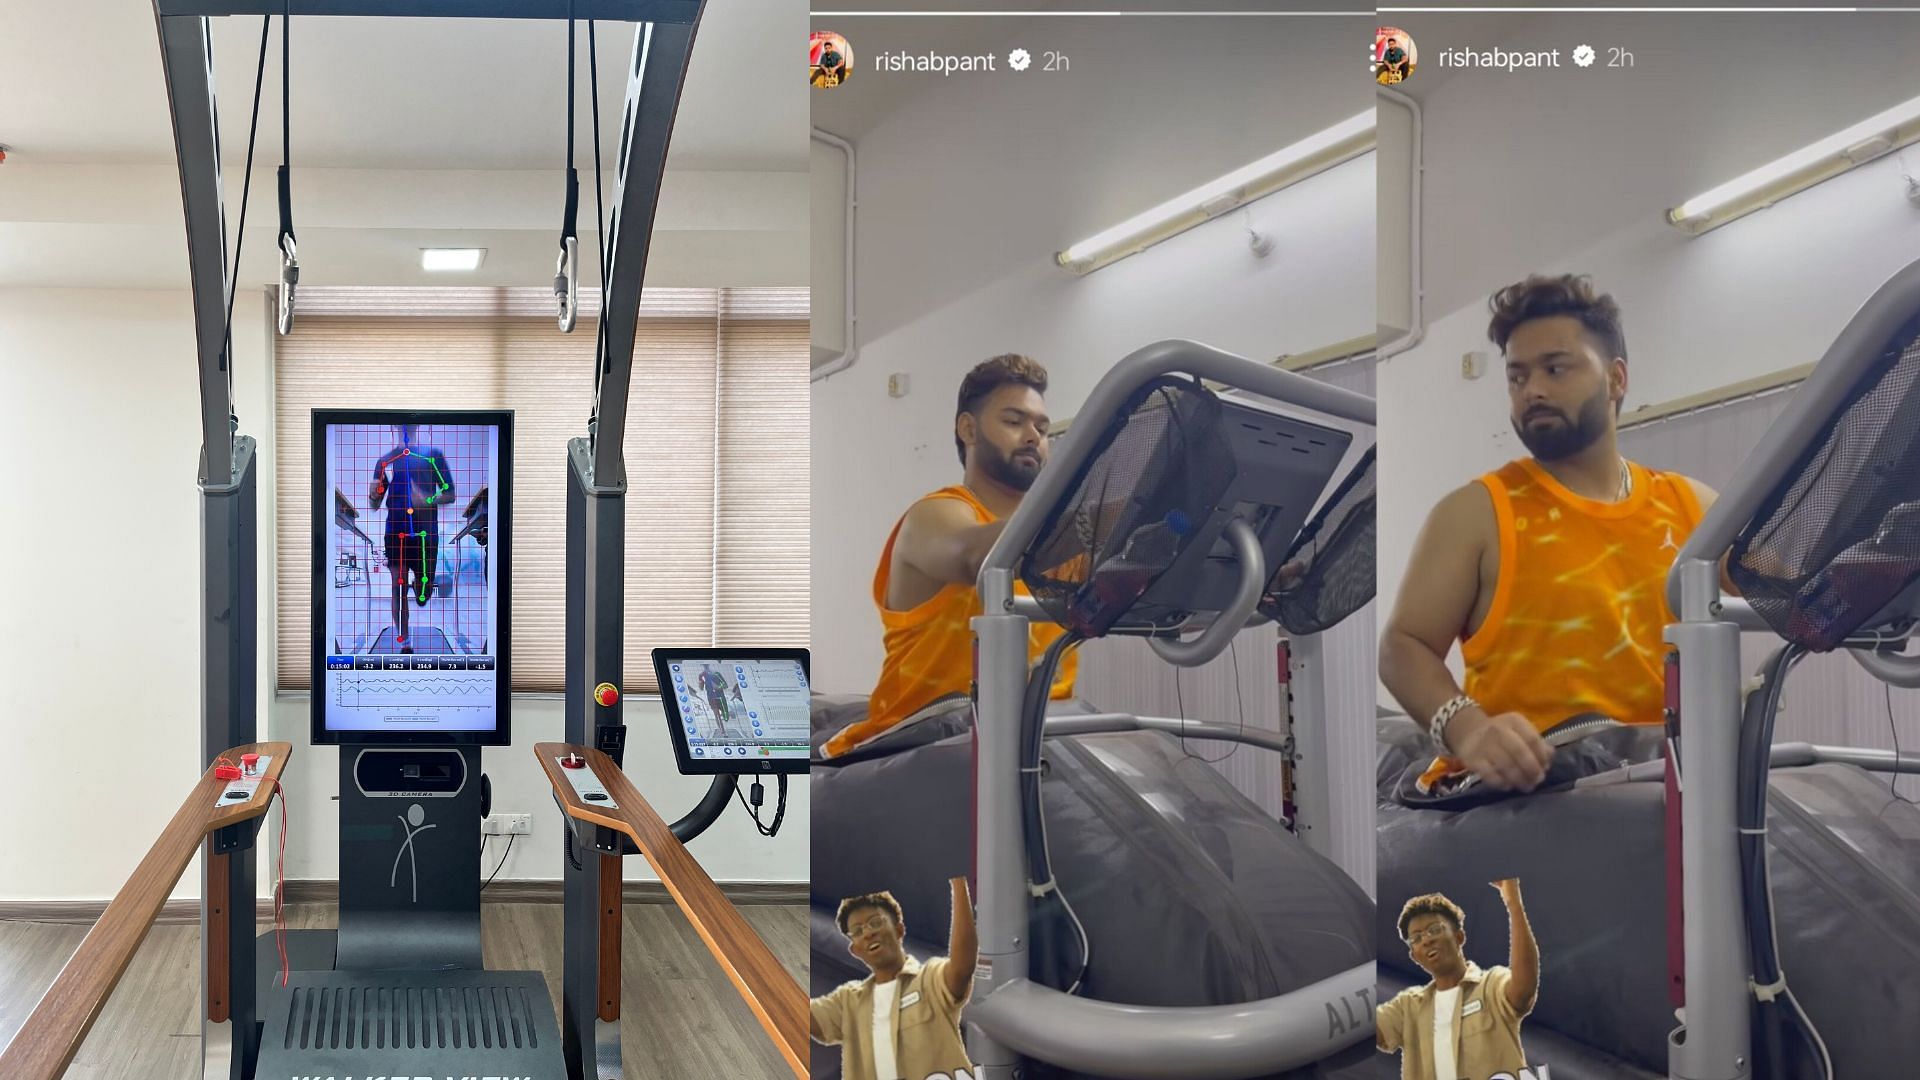 The Walker View in action (left) and Rishabh Pant using the anti-gravity treadmill (right). (Image Credits for Walker View: Maanas Upadhyay; for Anti-Gravity Treadmill: Rishabh Pant instagram)